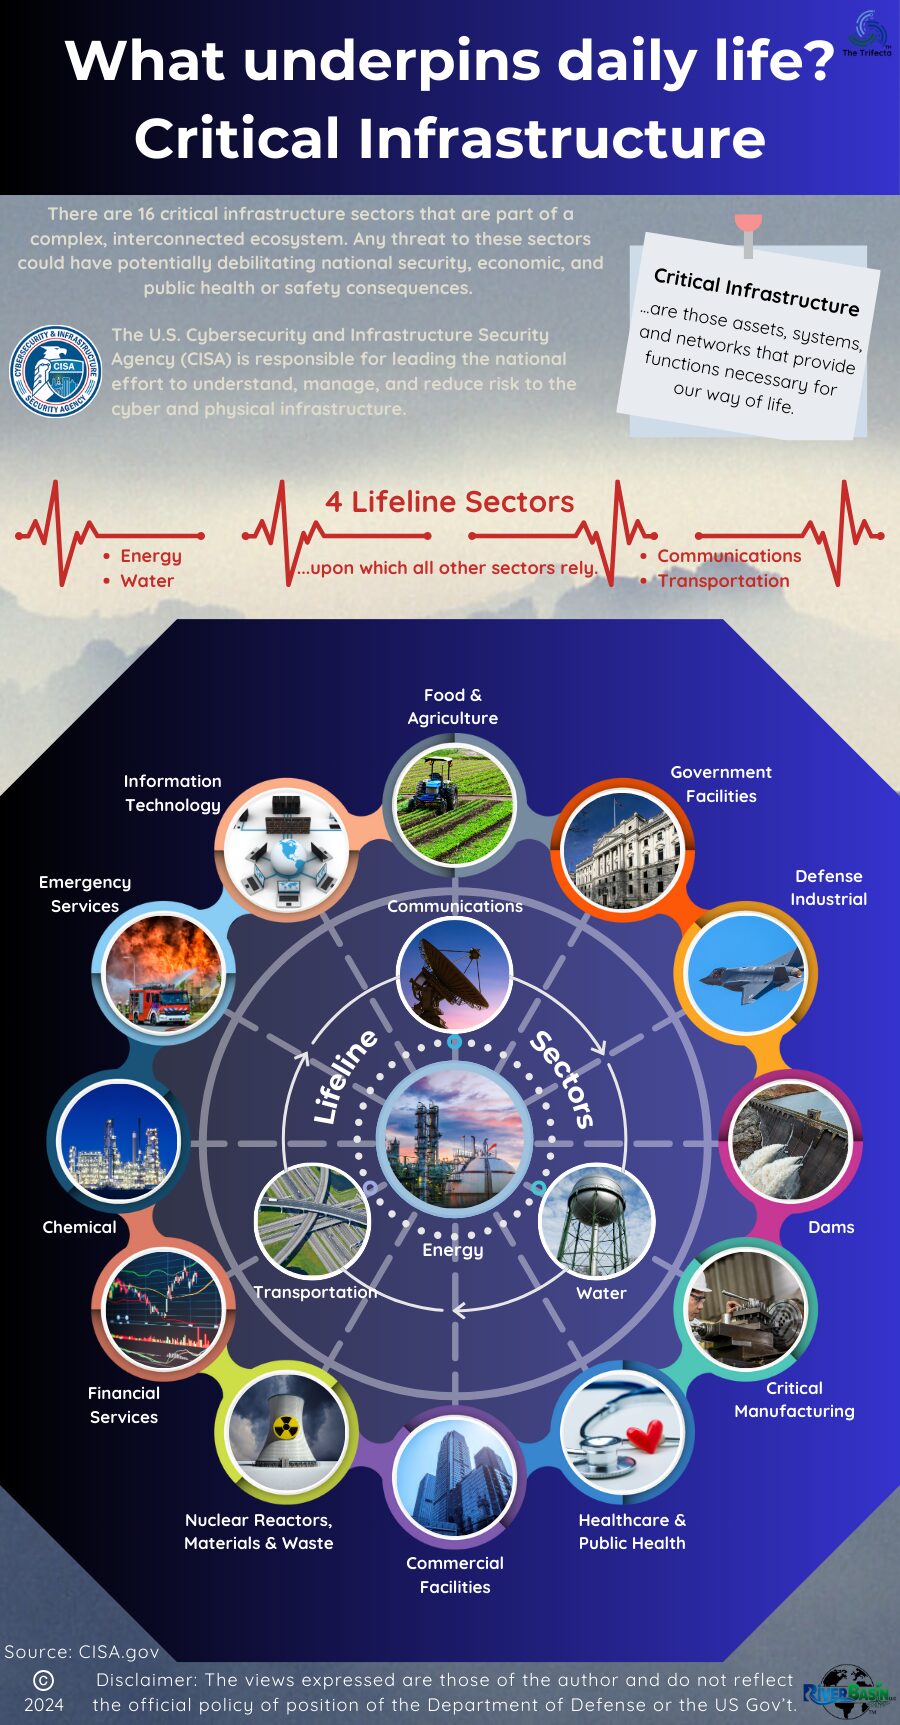 16 critical infrastructure sectors, including 4 identified as “lifelines,” underpin daily life. Energy is unique among the 16, as the critical infrastructure sector supporting all 55 functions.